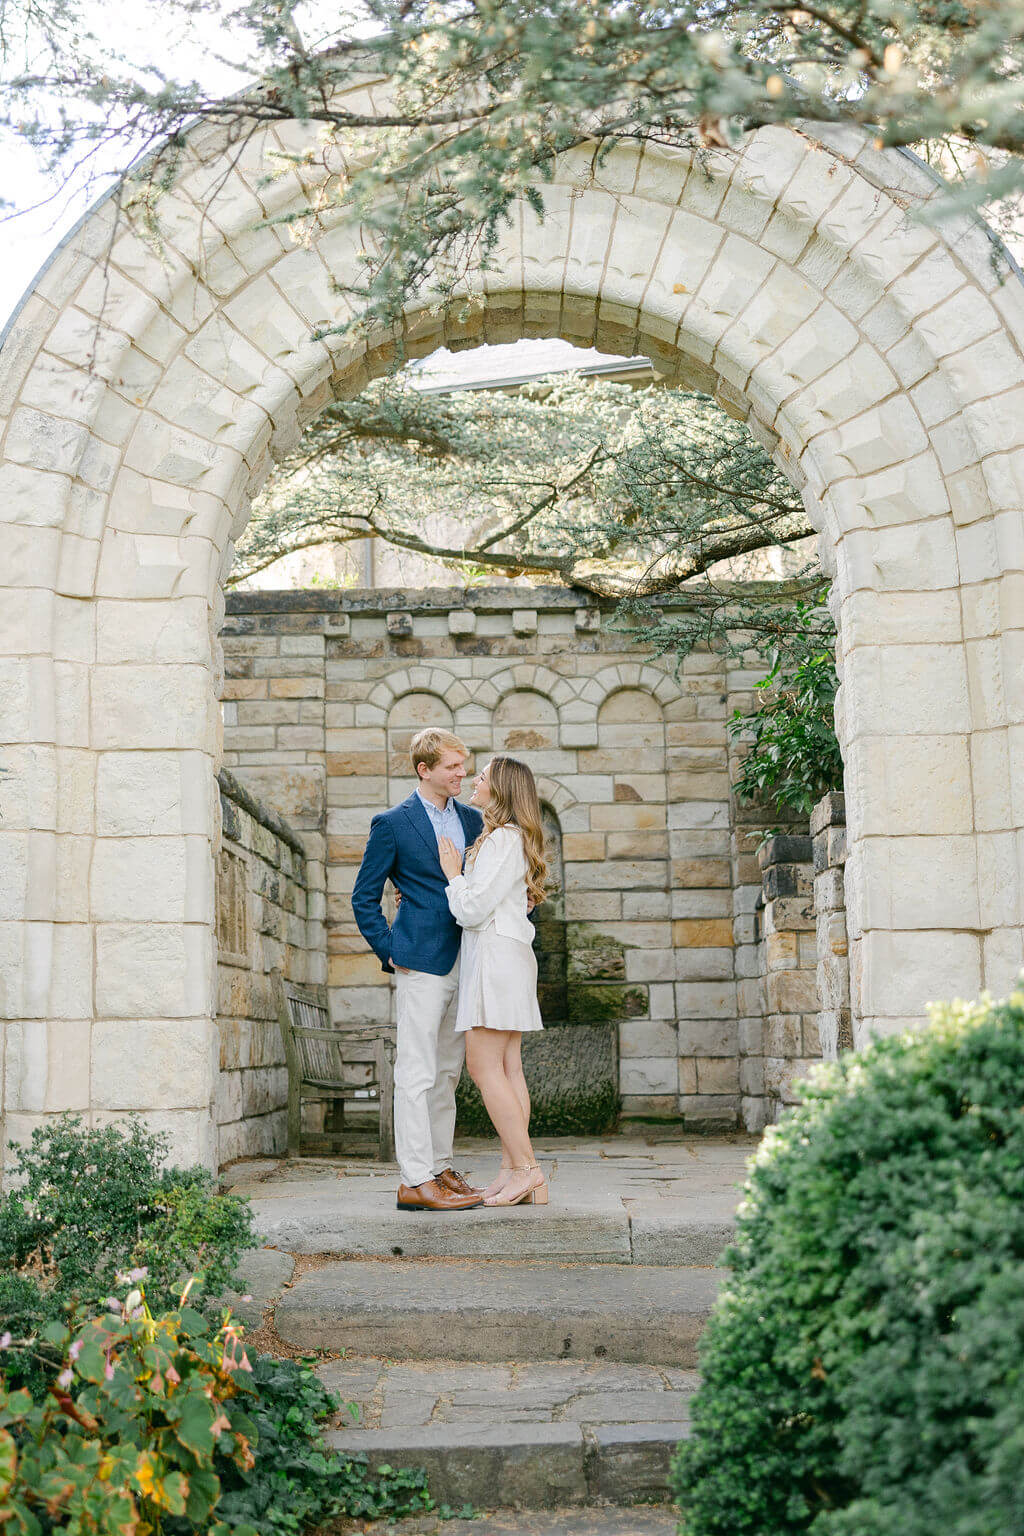 A photo of a couple standing under an arched stone gateway, sharing an intimate moment during their engagement session at the Washington National Cathedral. The historic architecture and serene greenery provide a romantic backdrop, representing their journey ahead. Captured by Get Ready Photo, Washington DC wedding photographers.